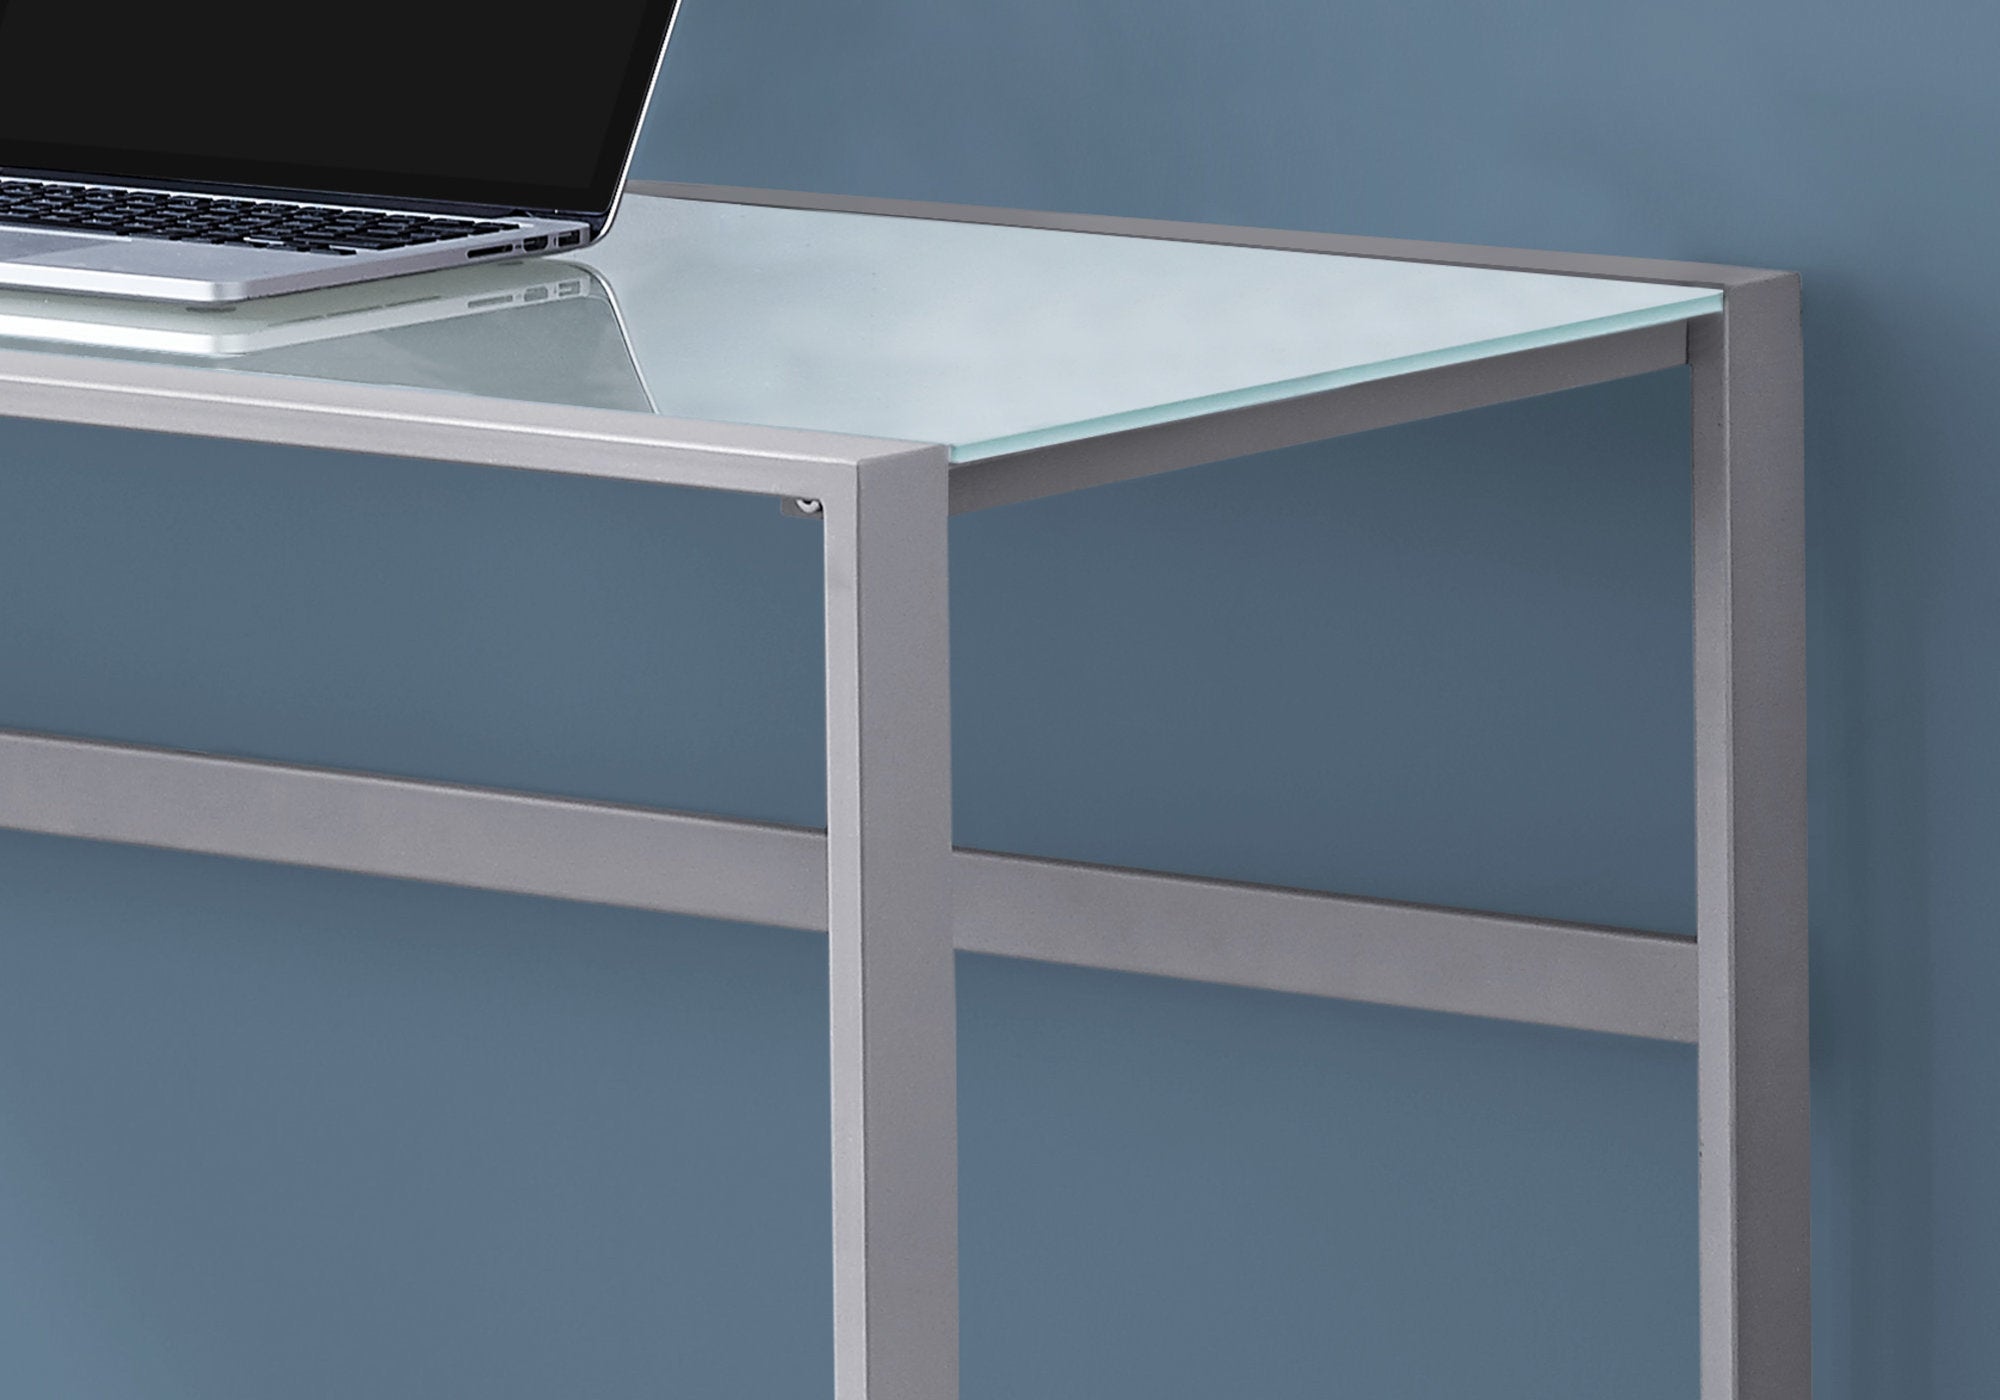 I 7380 - COMPUTER DESK - 48"L / SILVER METAL/ WHITE TEMPERED GLASS BY MONARCH SPECIALTIES INC